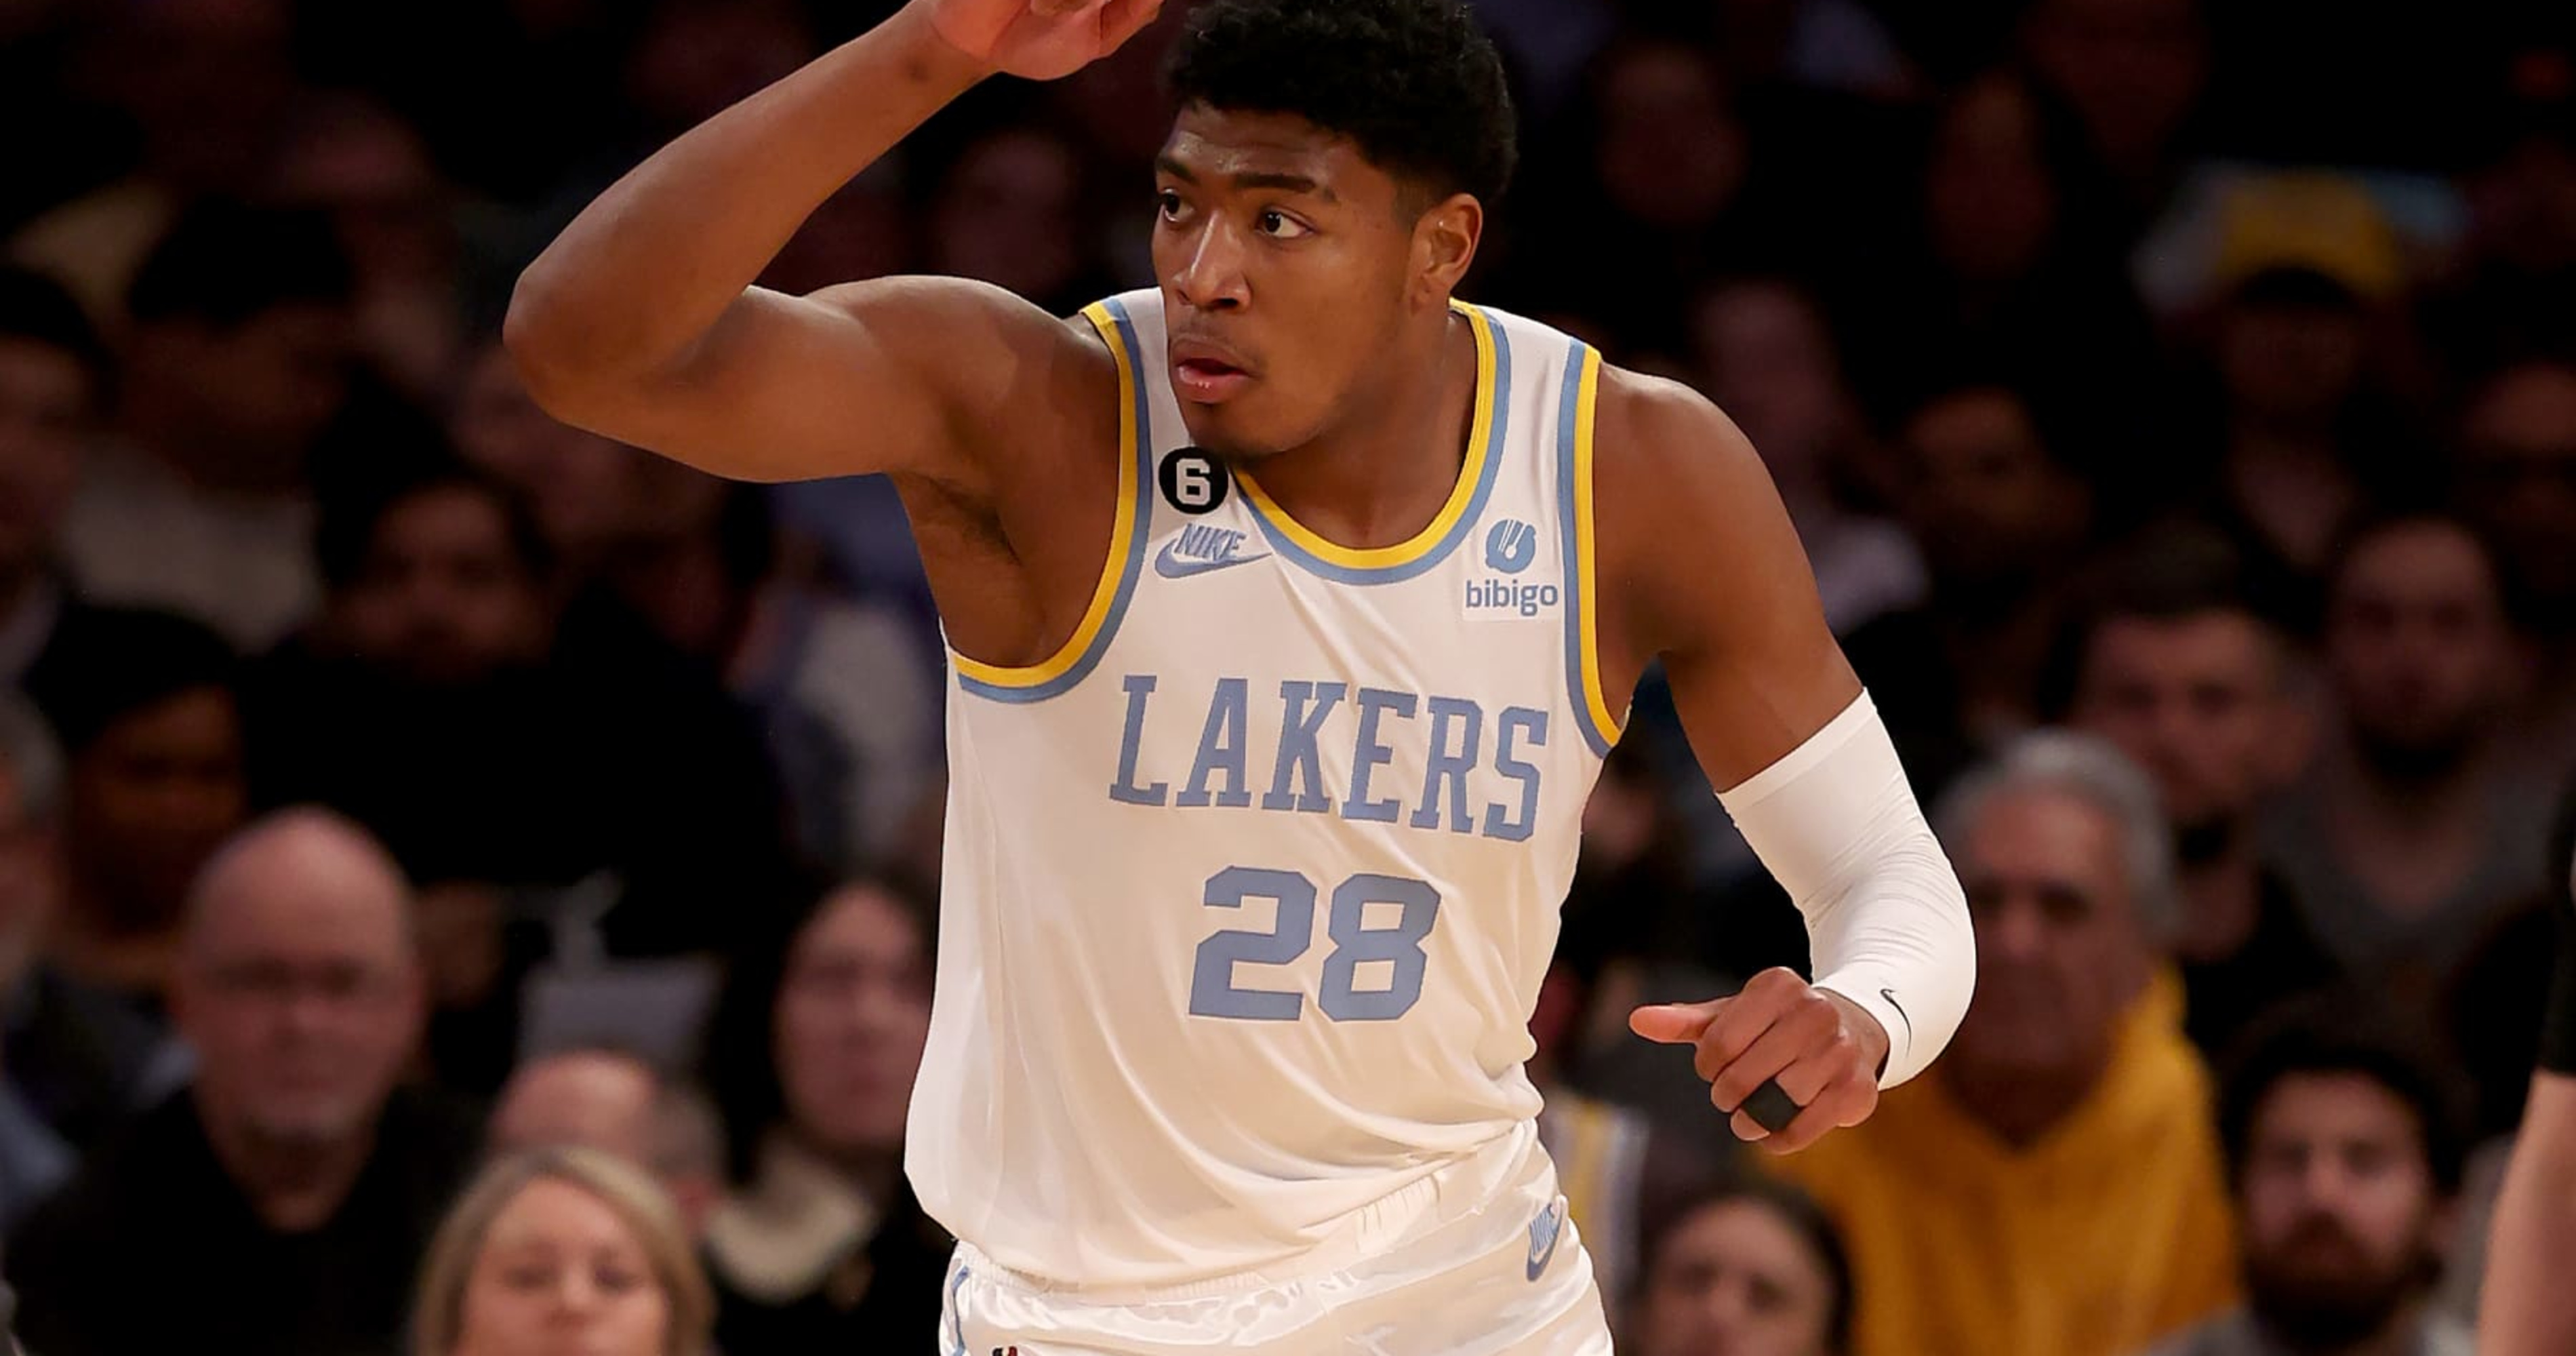 Rui Hachimura Helps, but the Lakers Can't Contend without Another Trade